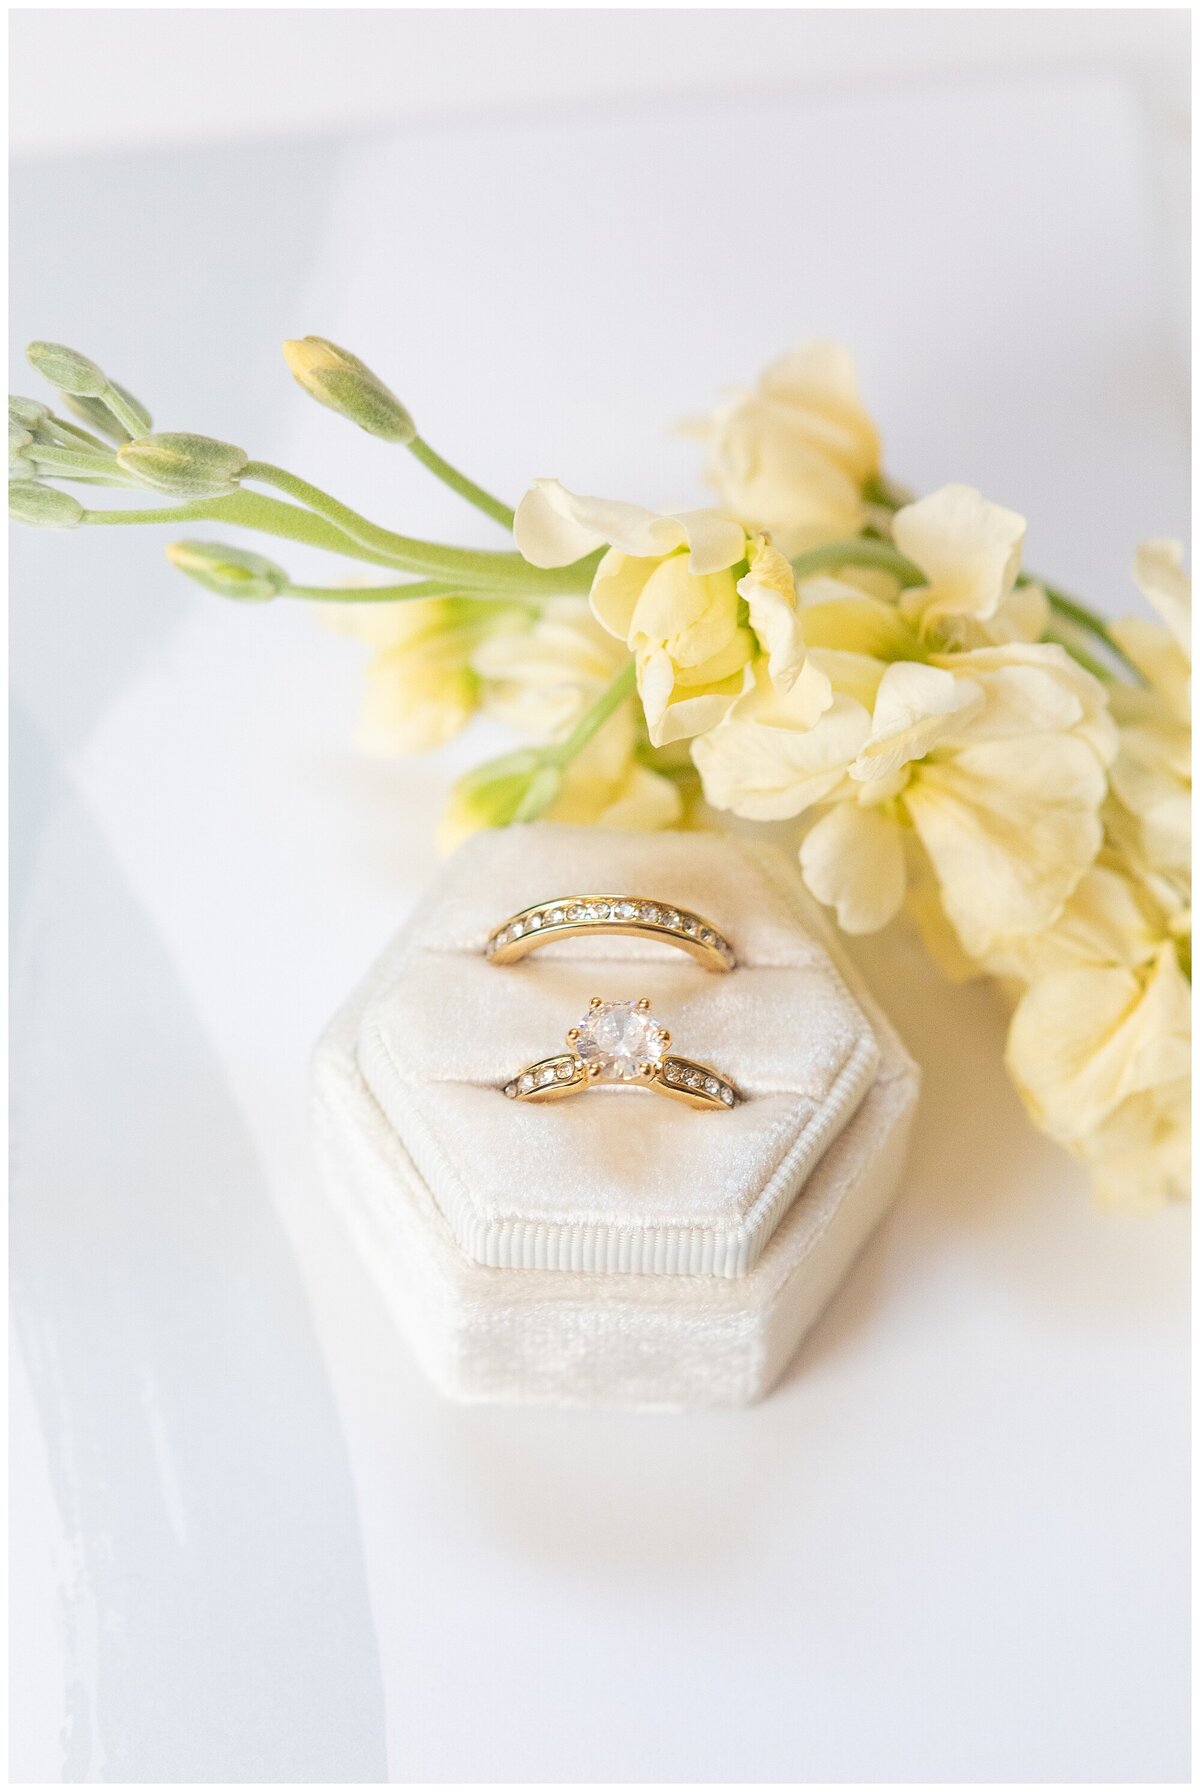 wedding rings with yellow florals